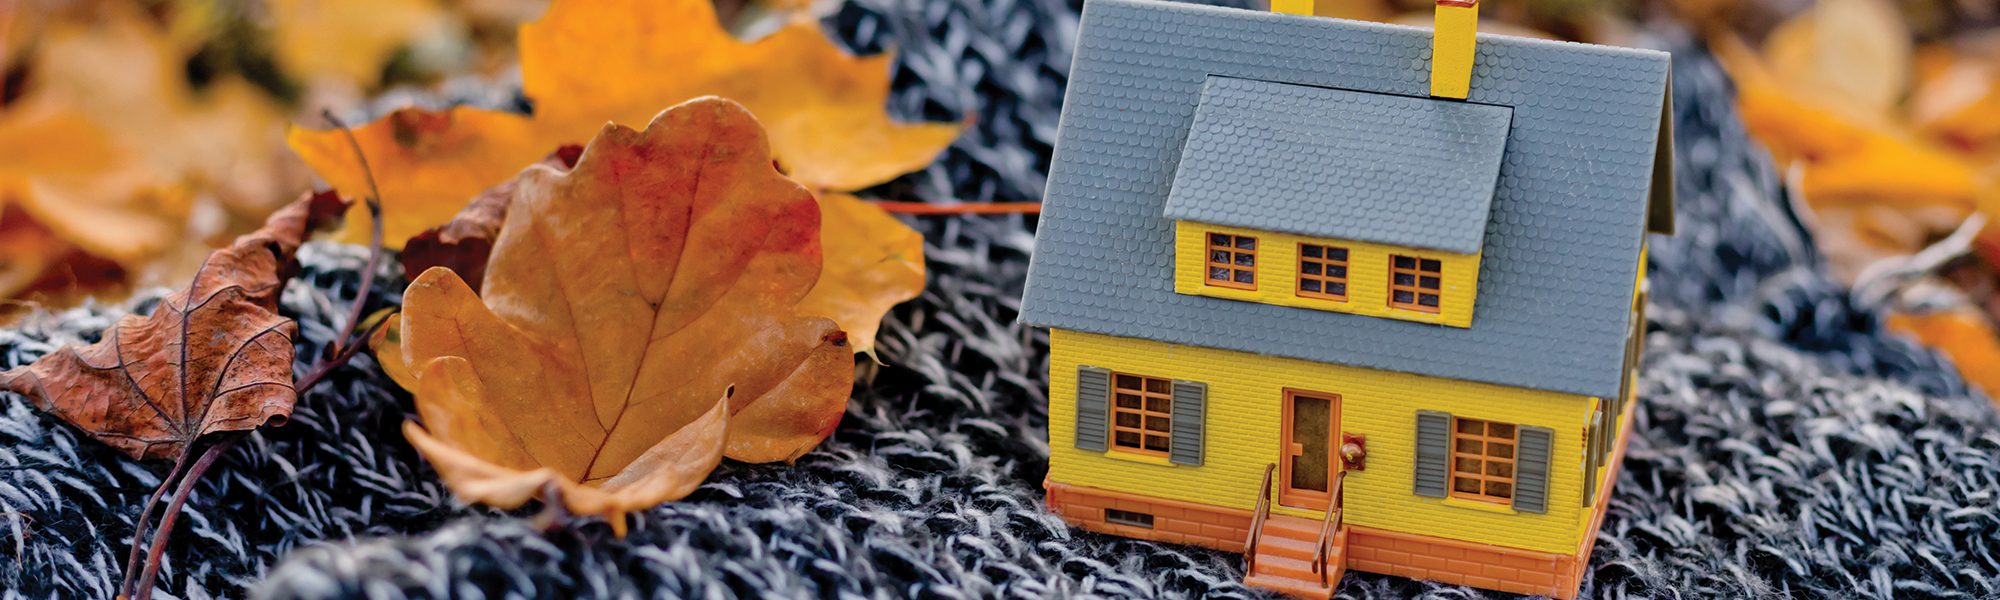 Get Ready for Cold Weather: 5 Fall Home Maintenance Must-Dos 